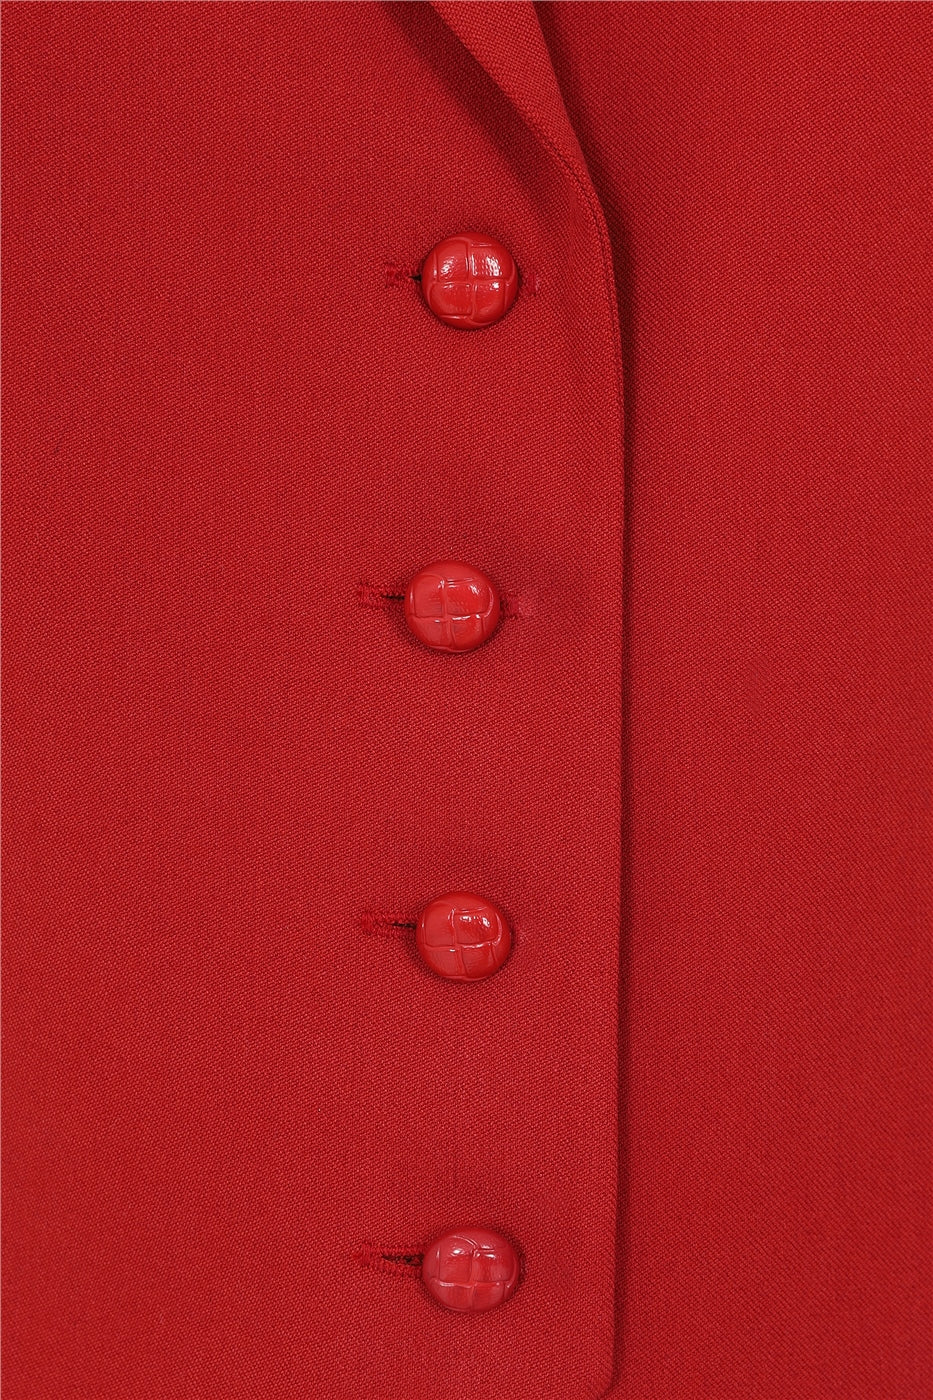 Close up of the red buttons